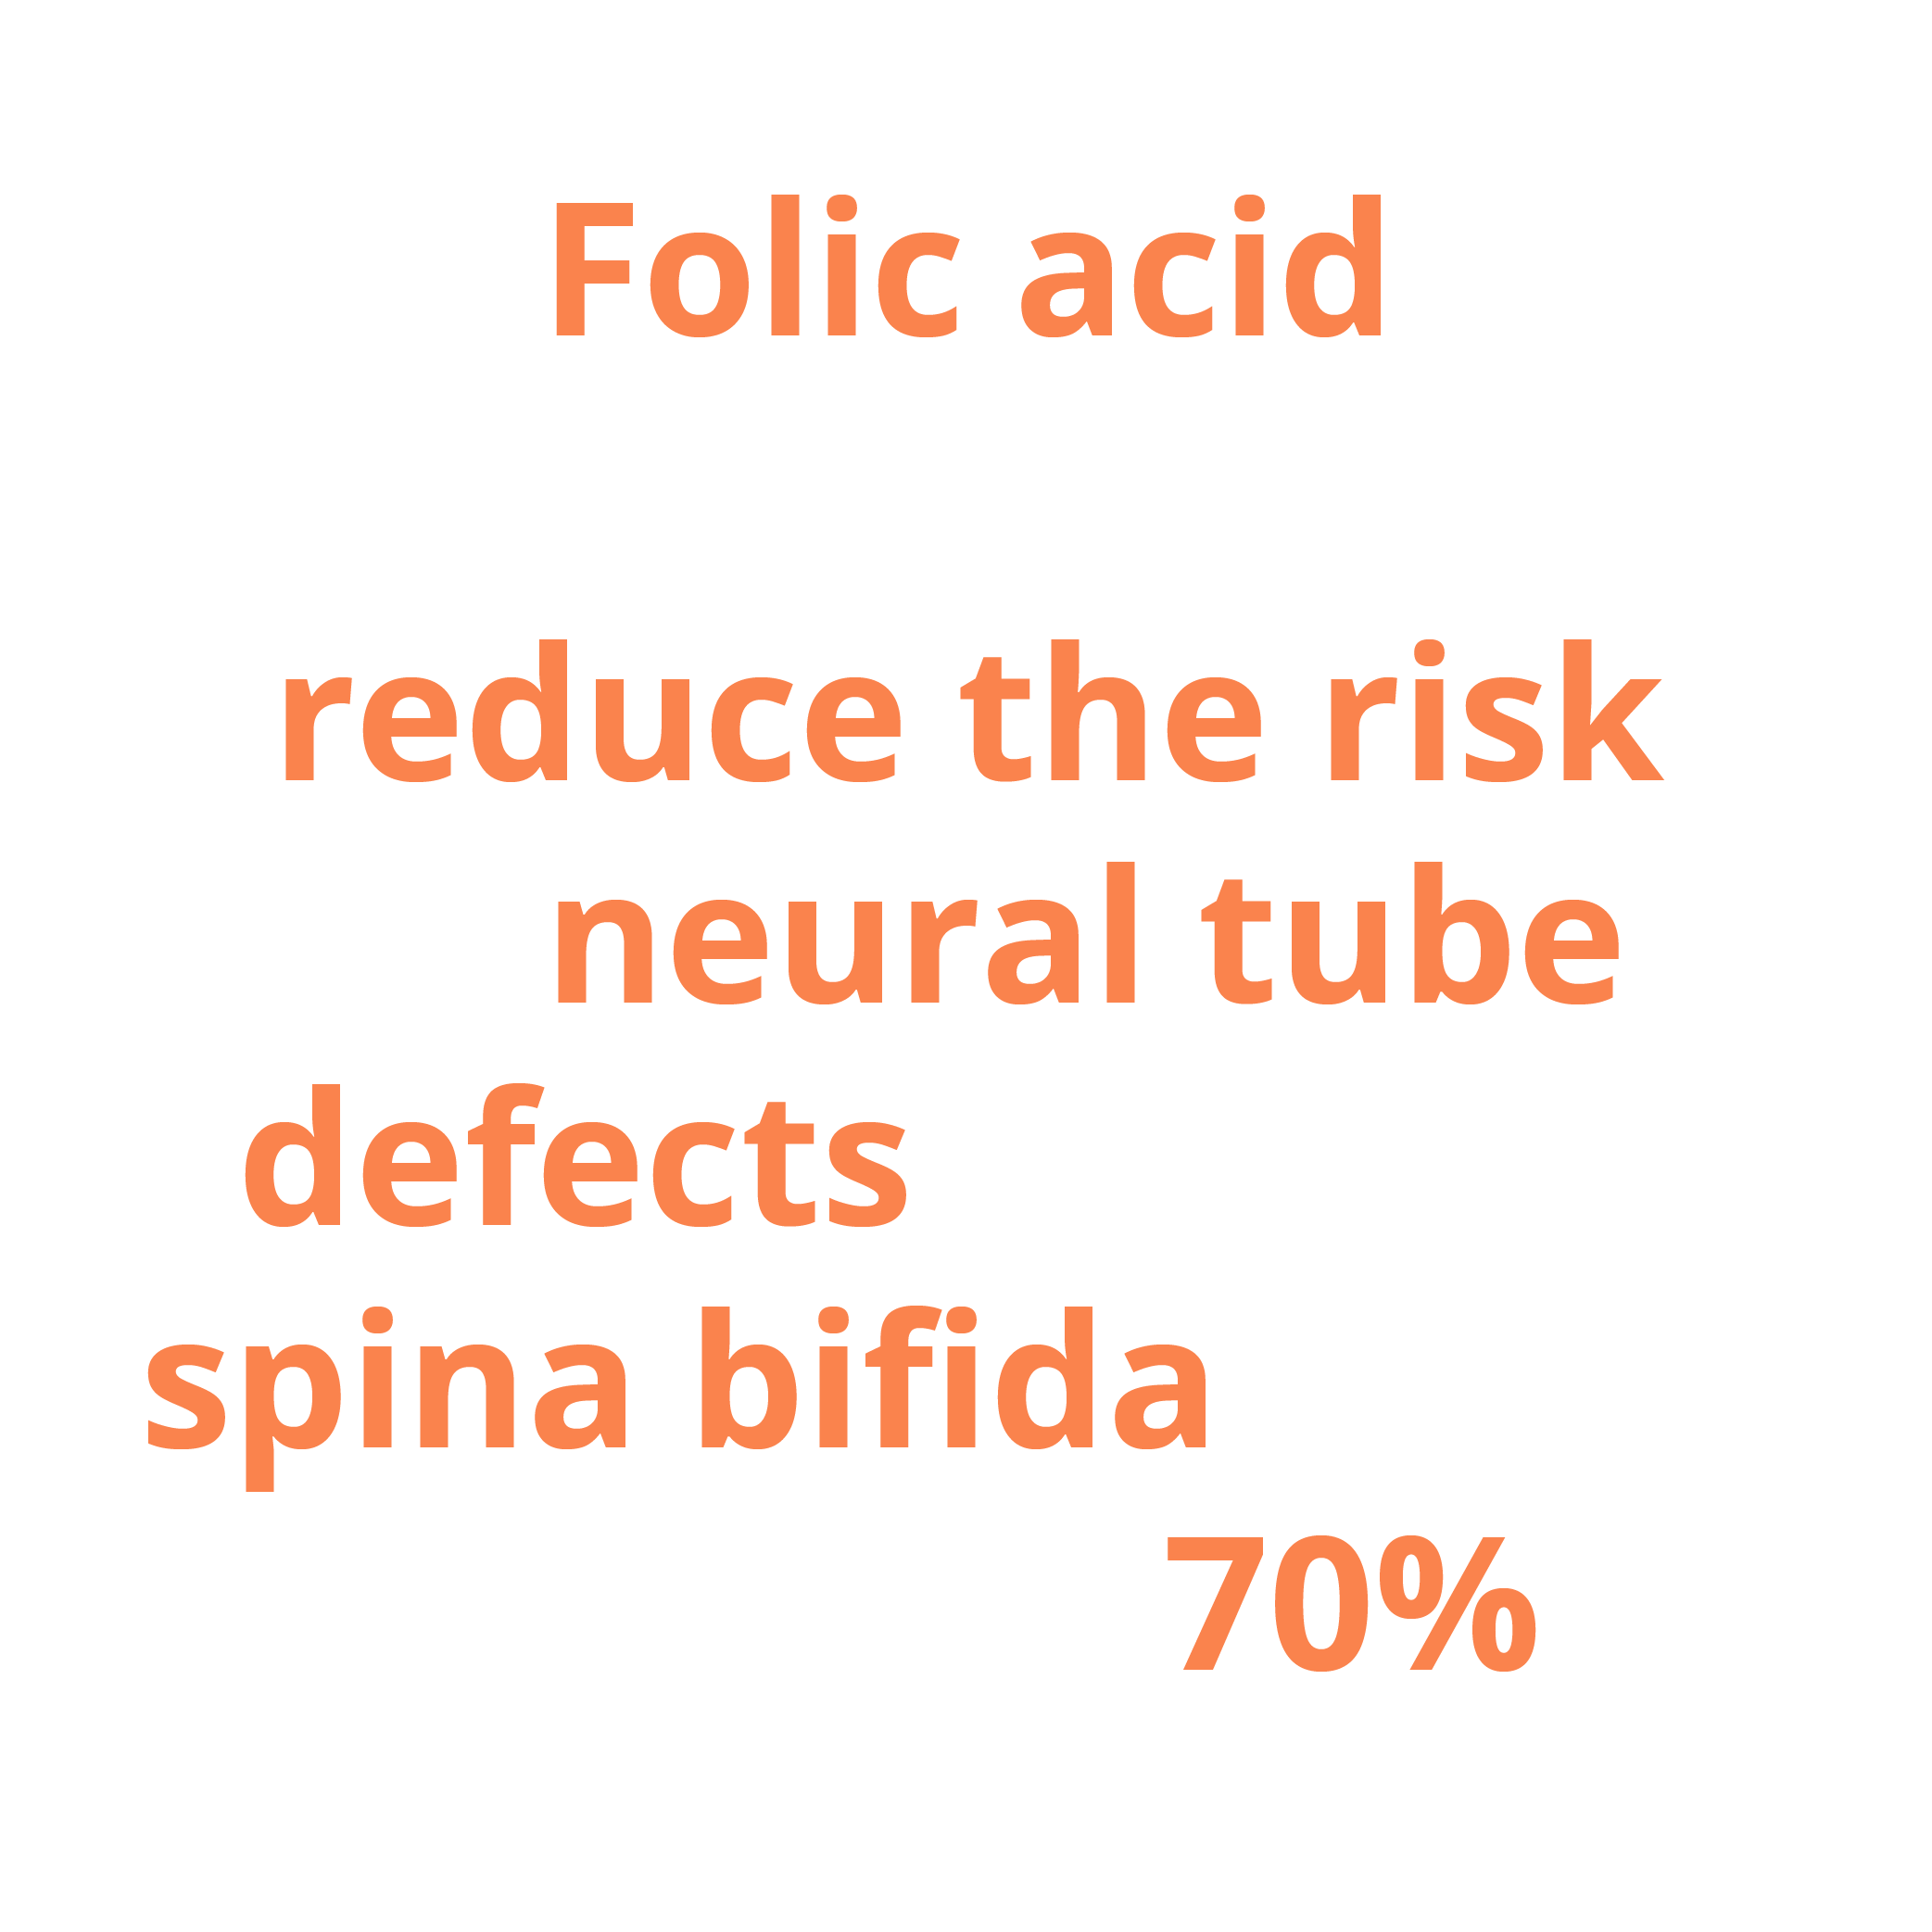 Folic acid has proven to reduce the risk of neural tube defects such as spina bifida, by as much as 70 percent